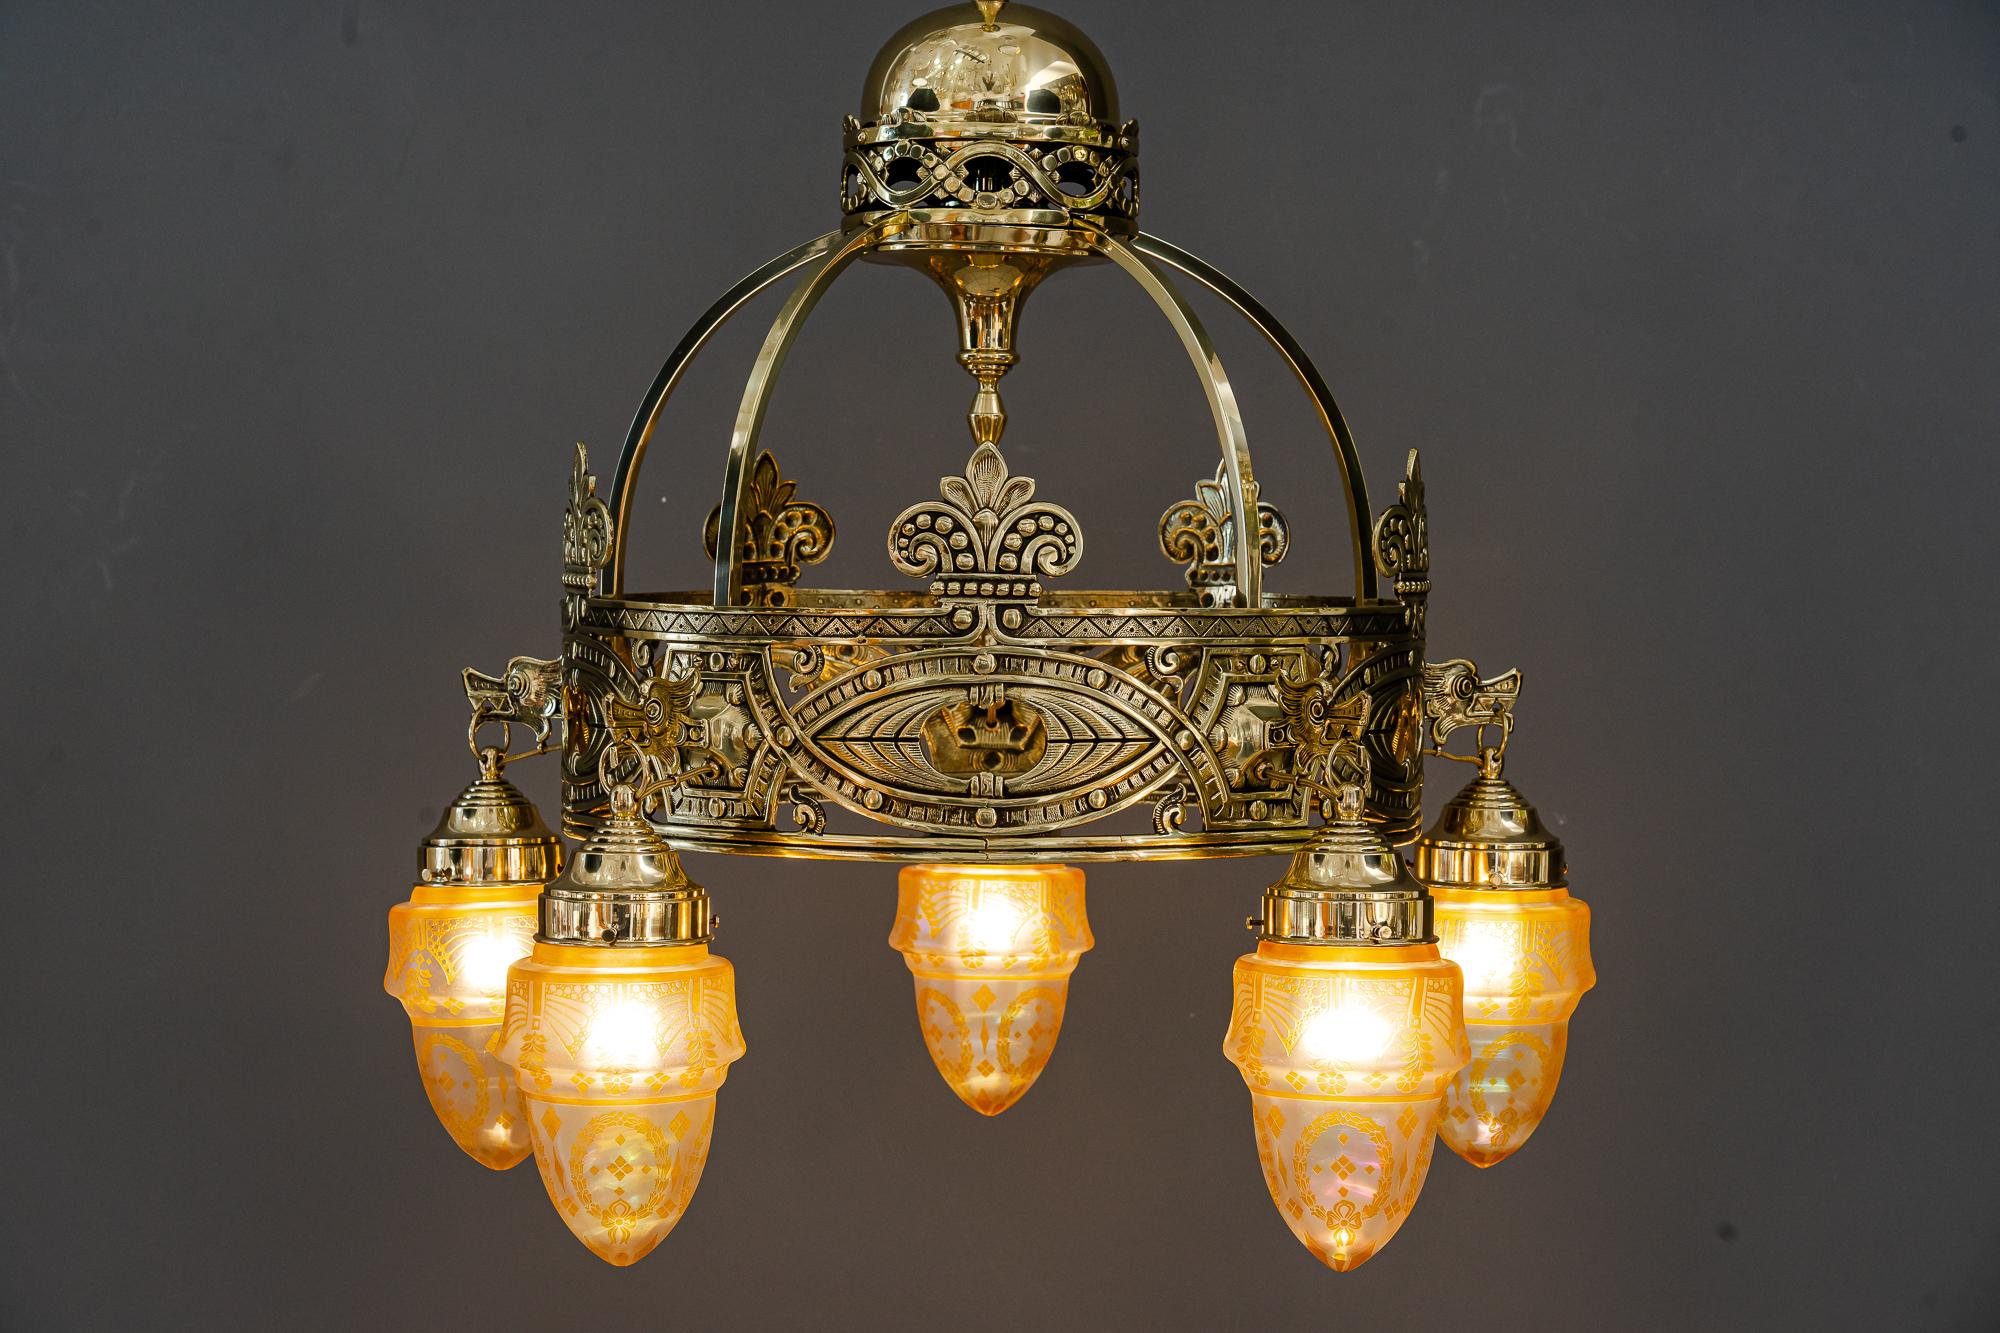 Art Deco chandelier with original glass shades Vienna 1920s
Polished and stove enamelled
Original glass shades
New wired.
 